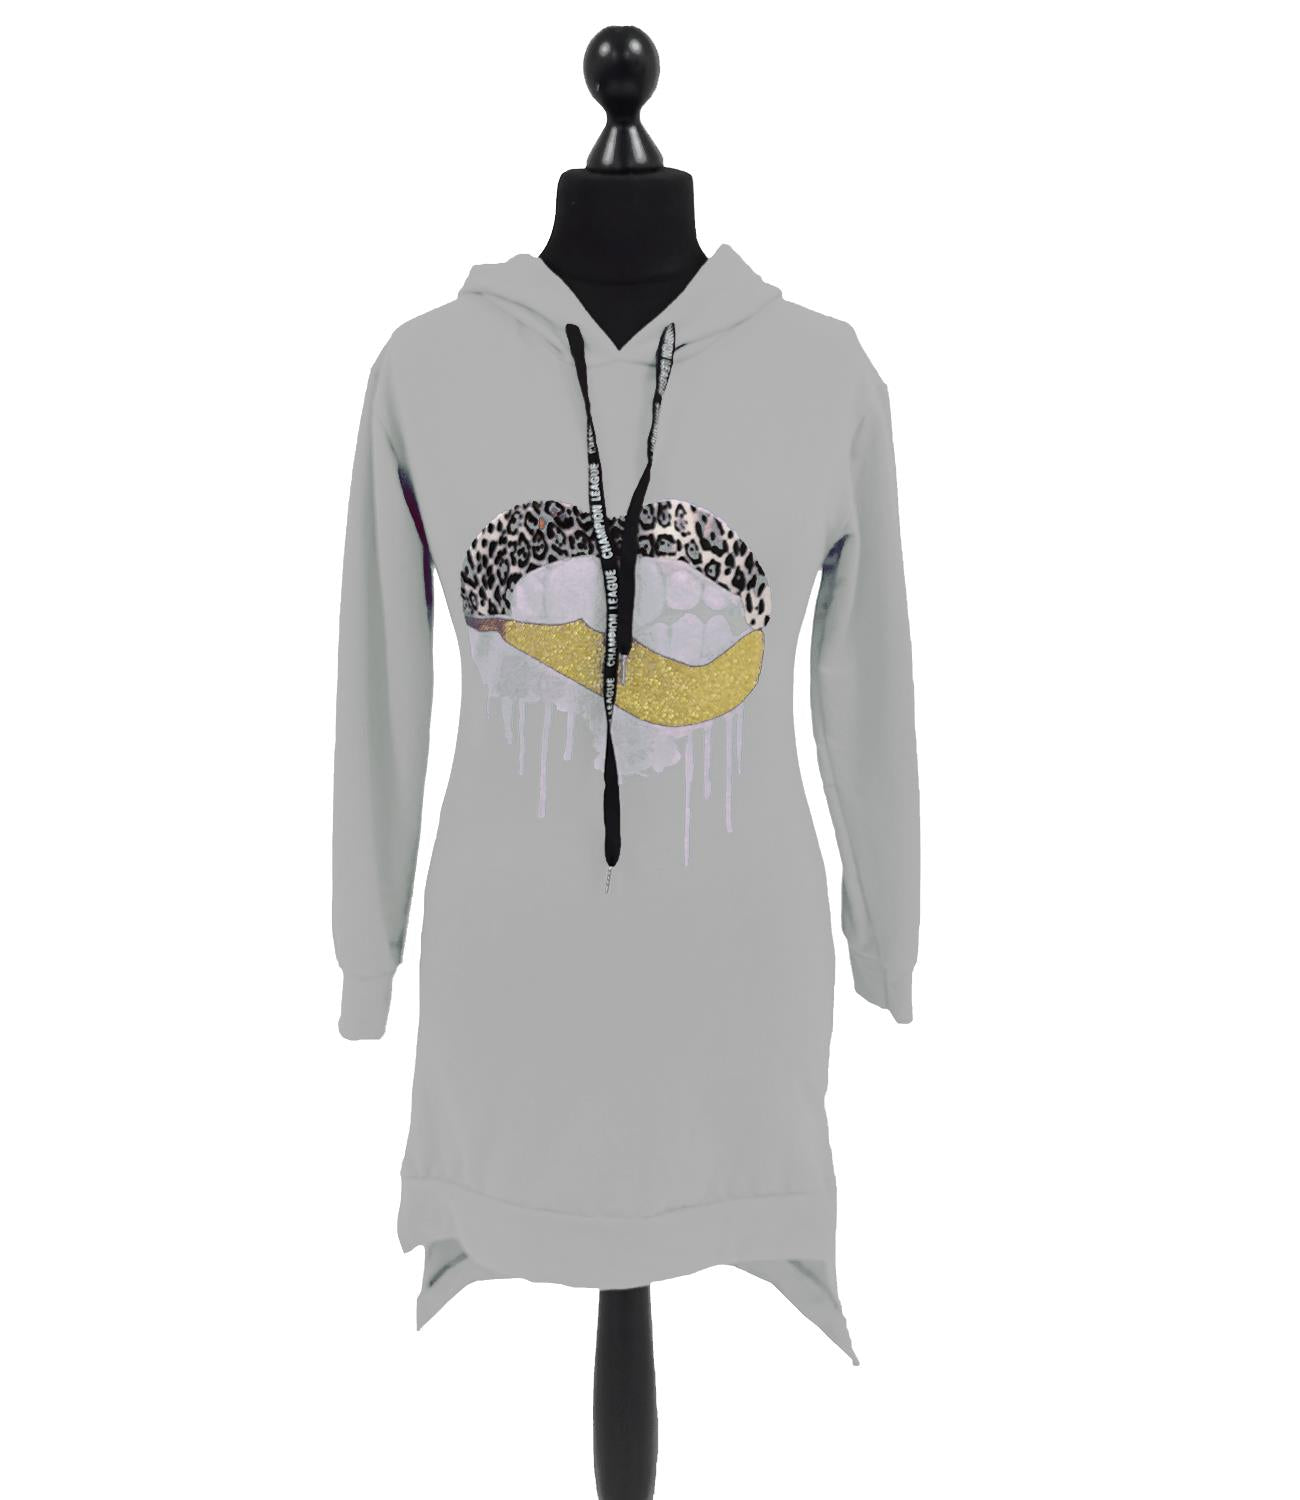 Made In Italy Lip Bite Print Dip Hem Jersey Cotton Hooded Top